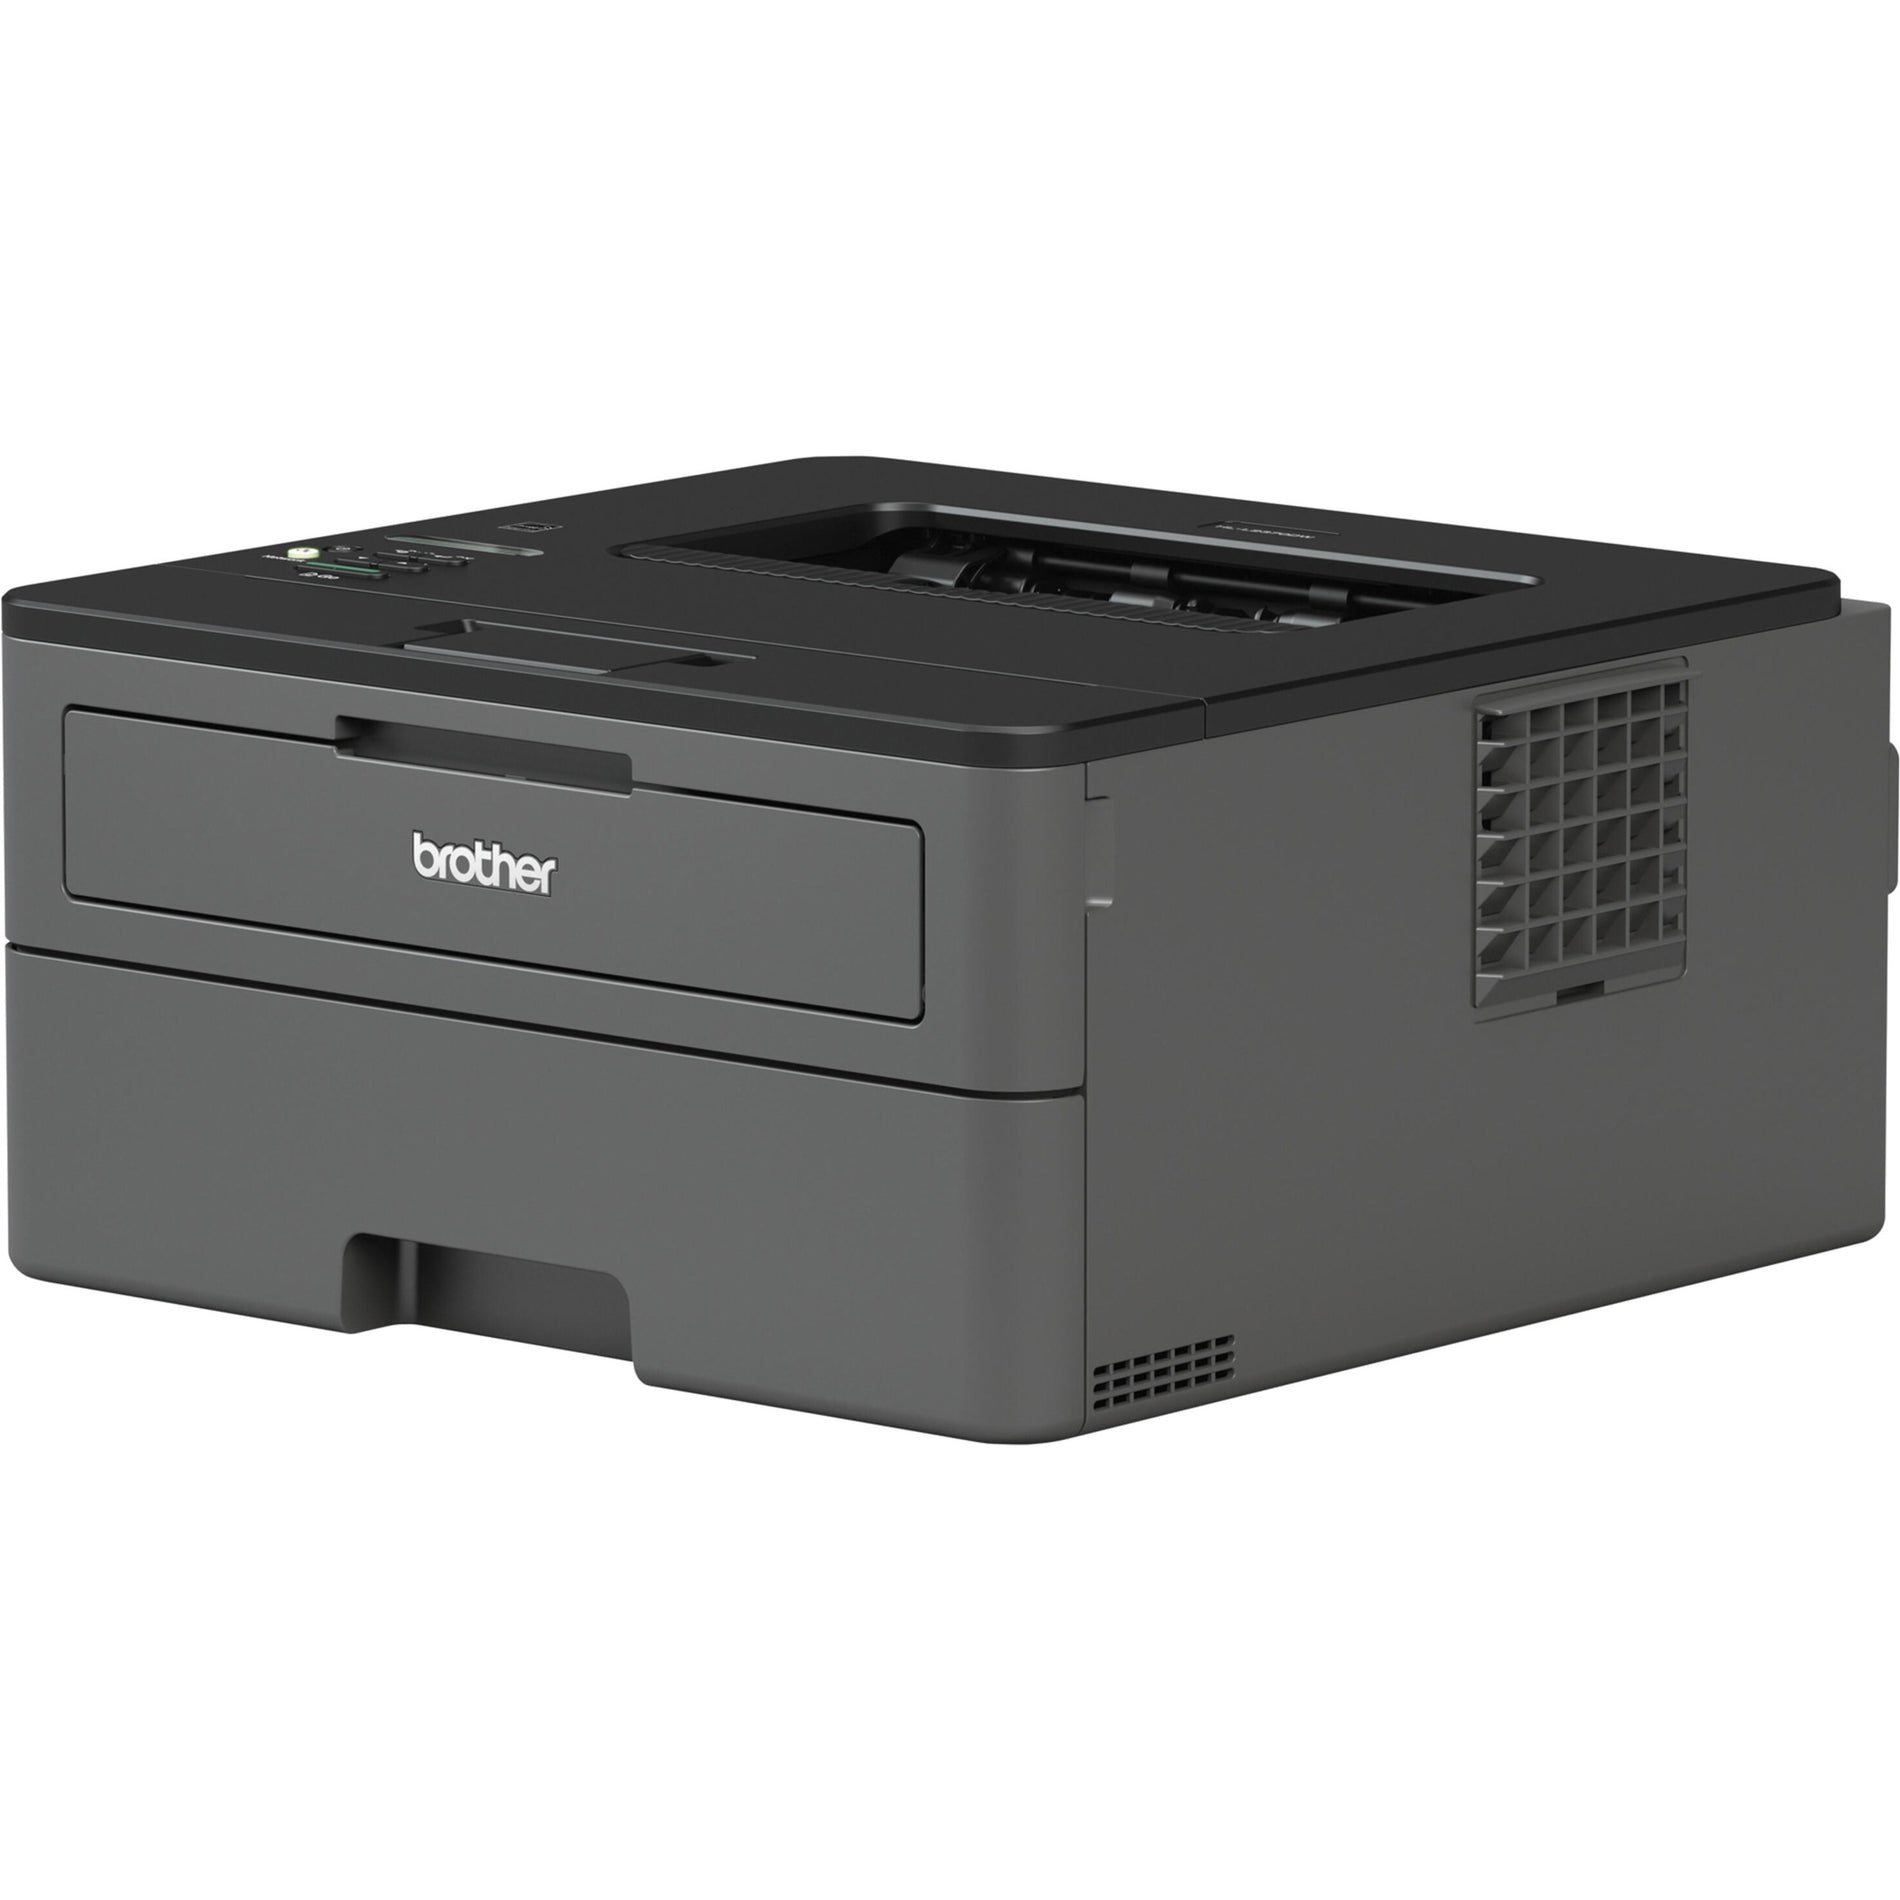 Brother HL-L2370DW Compact Laser Printer with Wireless & Ethernet, Duplex Printing, and 1-Year Limited Warranty